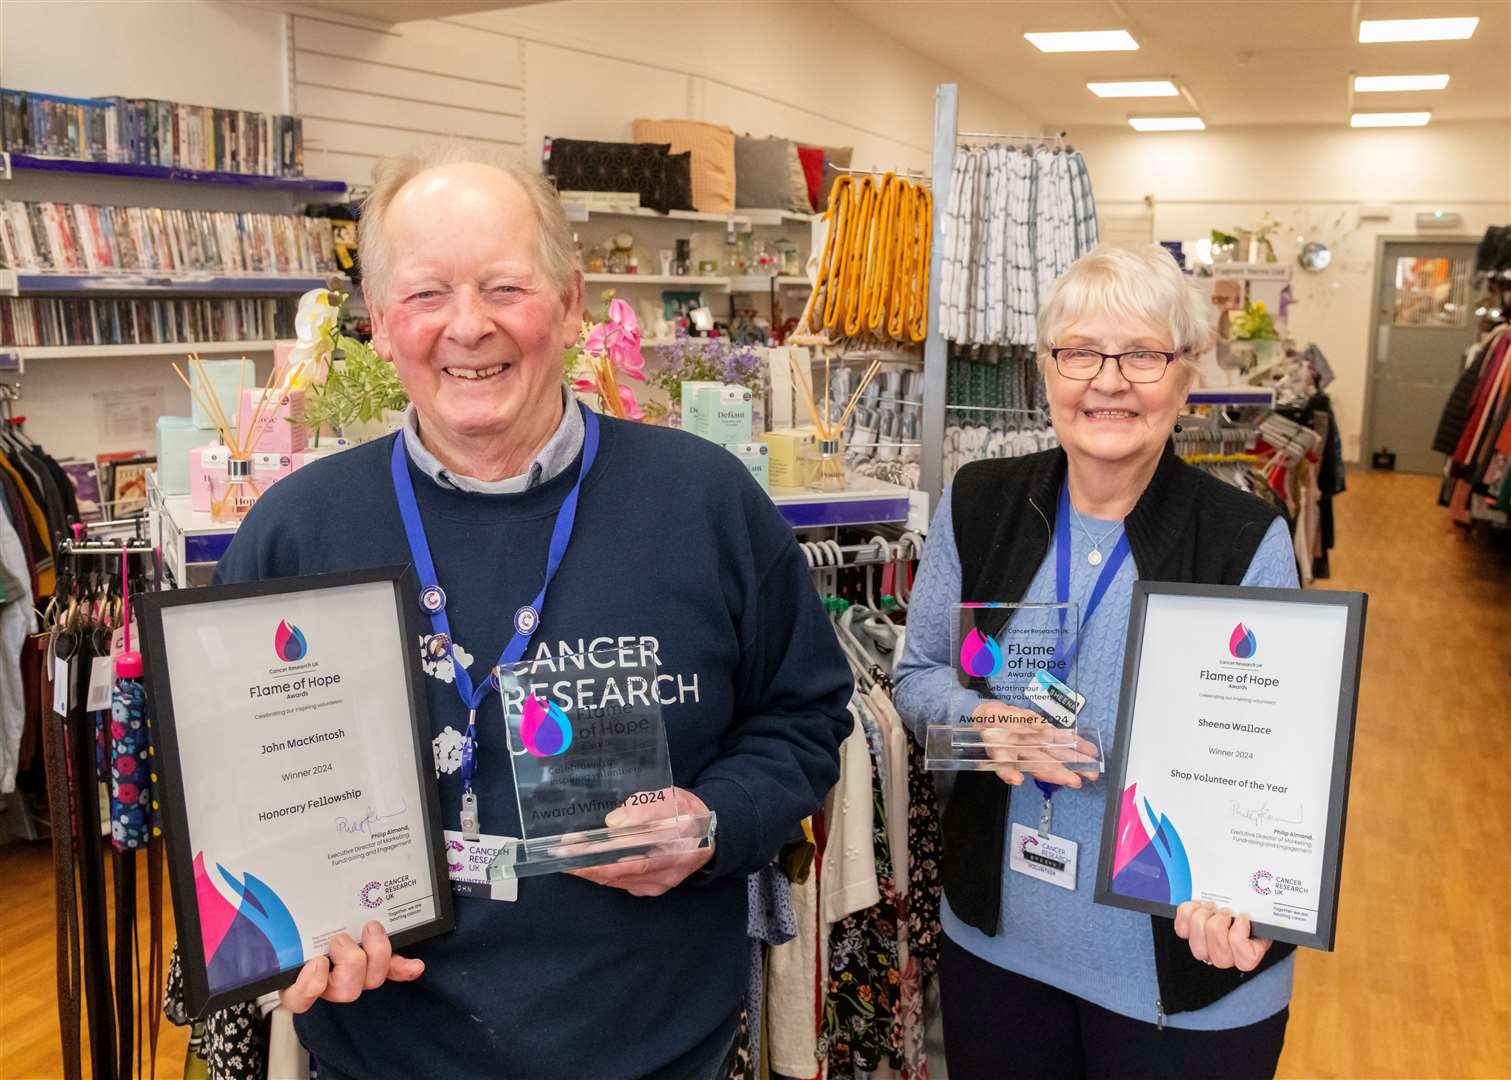 John MacKintosh won the Honorary Fellowship Award and Sheena Wallace won Volunteer of the Year at the annual Flame of Hope awards in Edinburgh. Picture: Beth Taylor